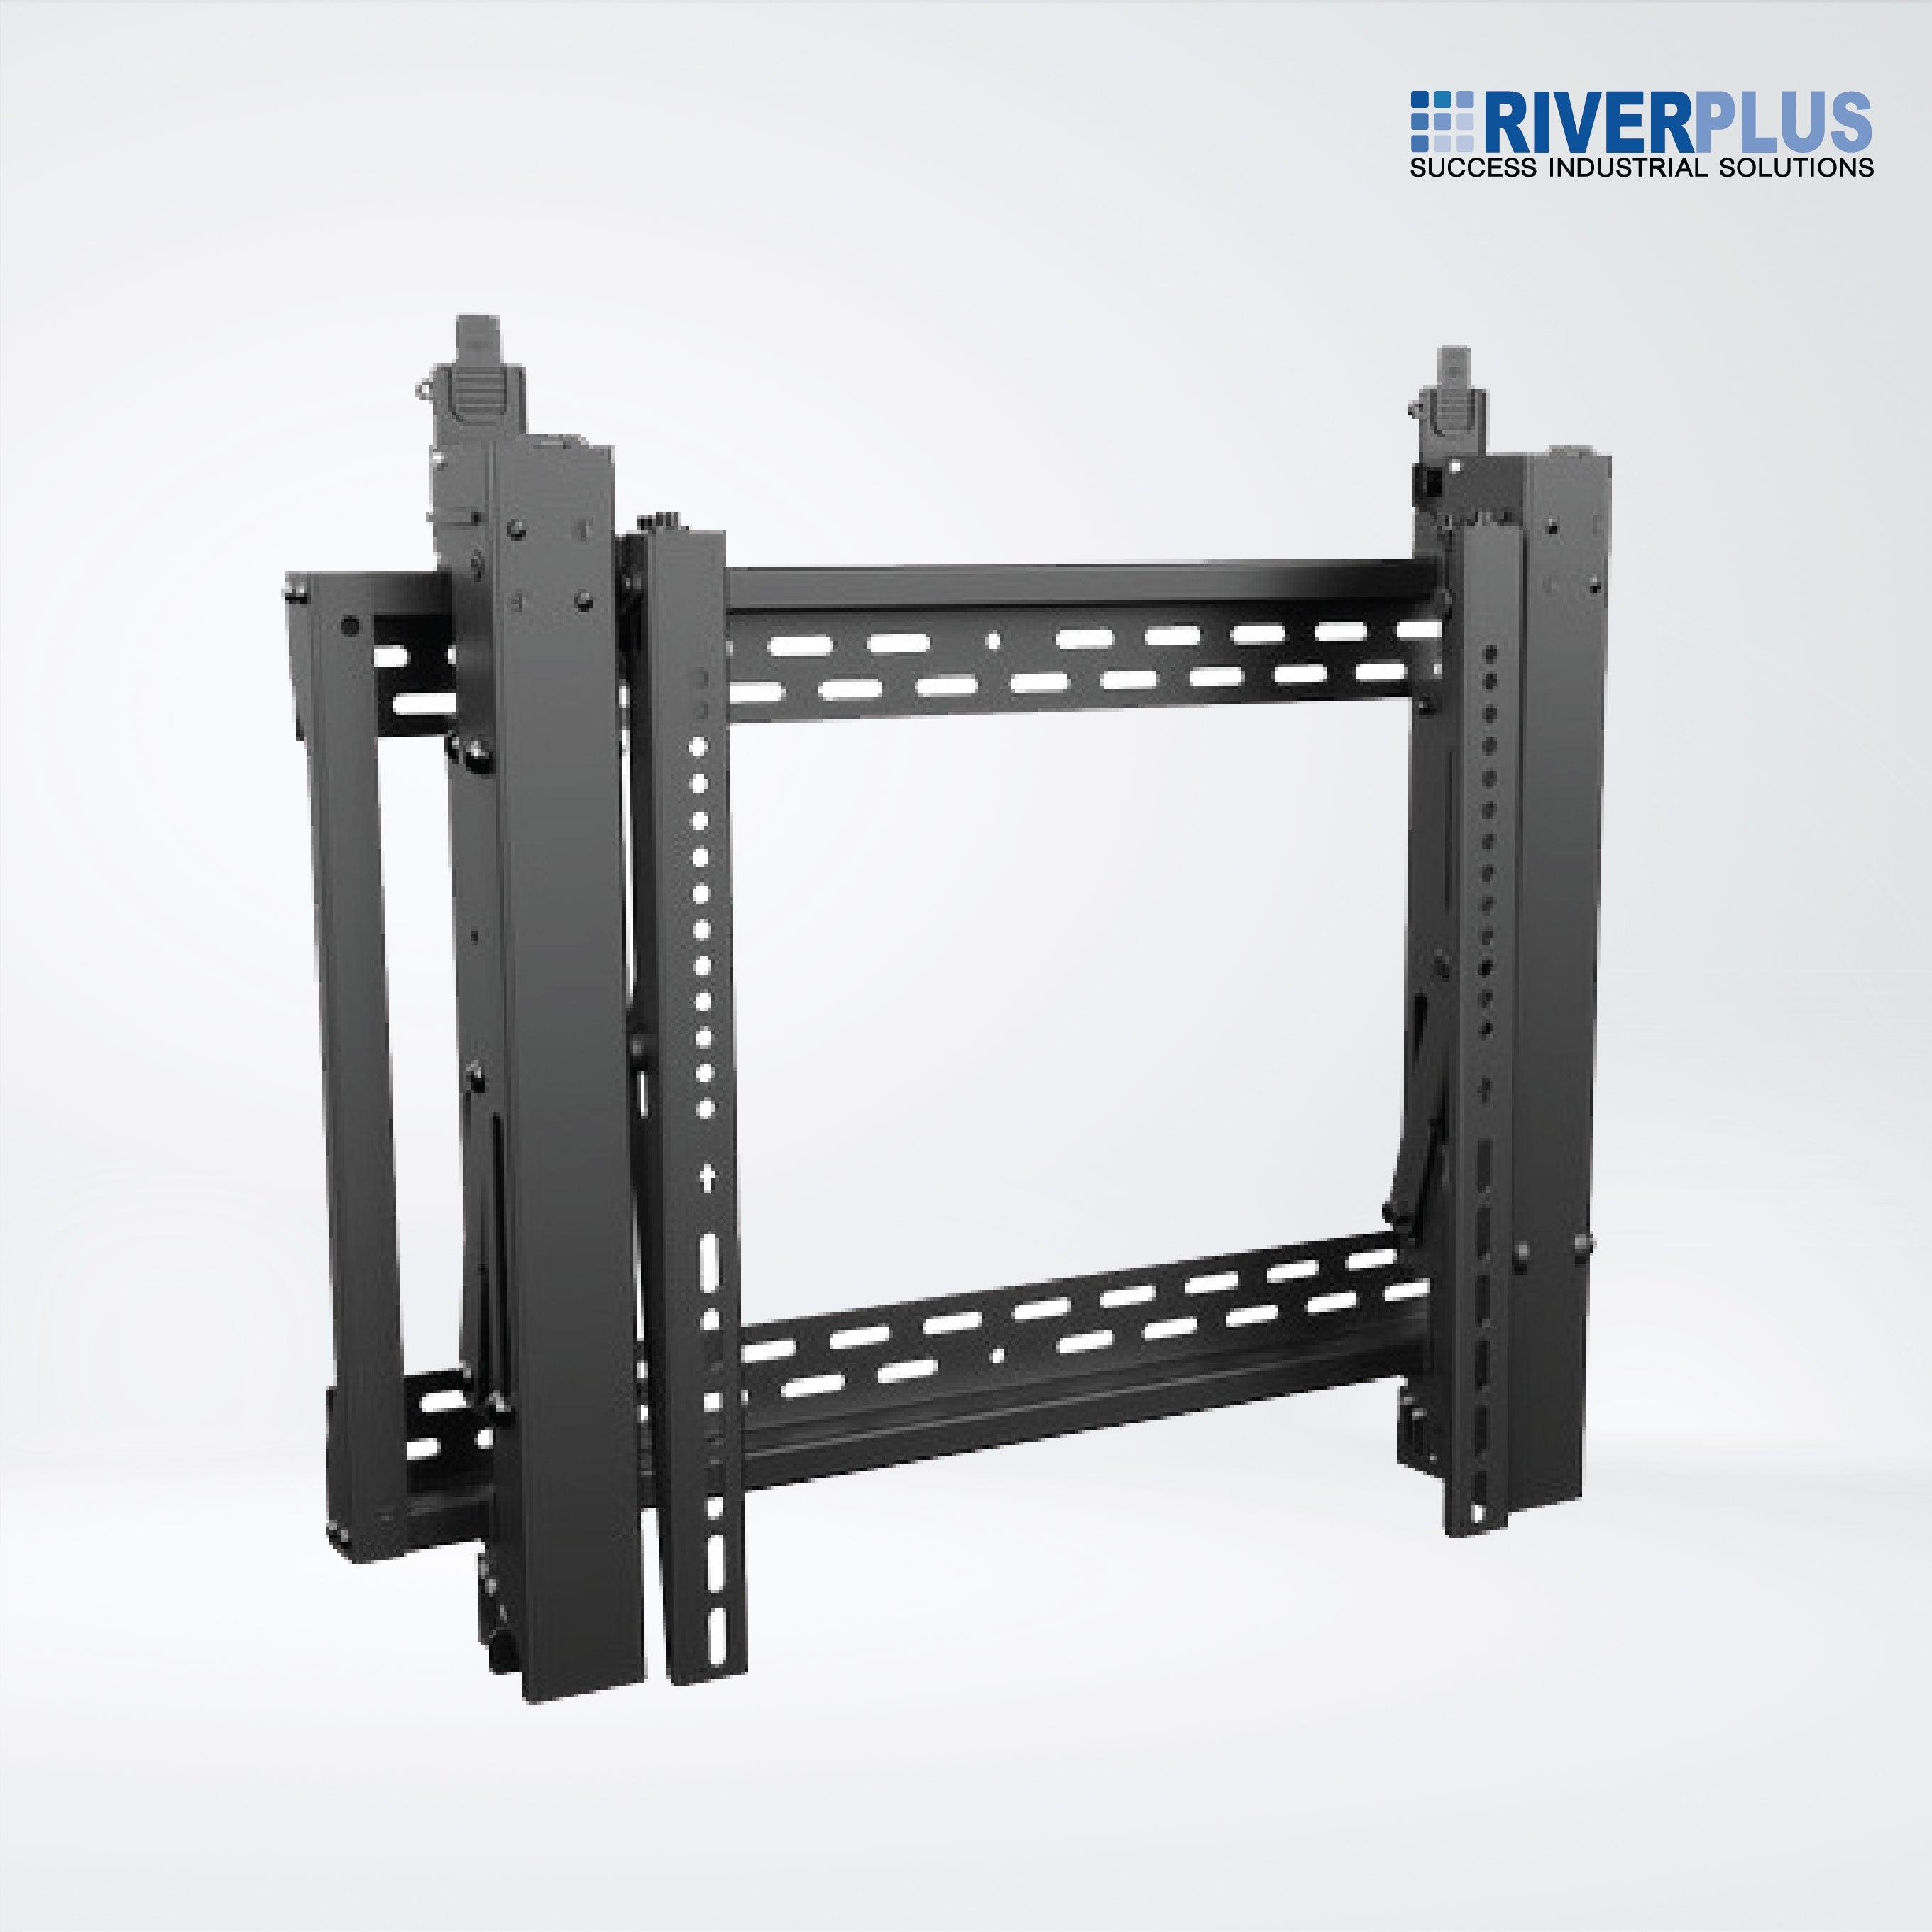 LVW06-46T POP-OUT LANDSCAPE VIDEO WALL MOUNT For most 45"-70" LED, LCD flat panel TVs - Riverplus